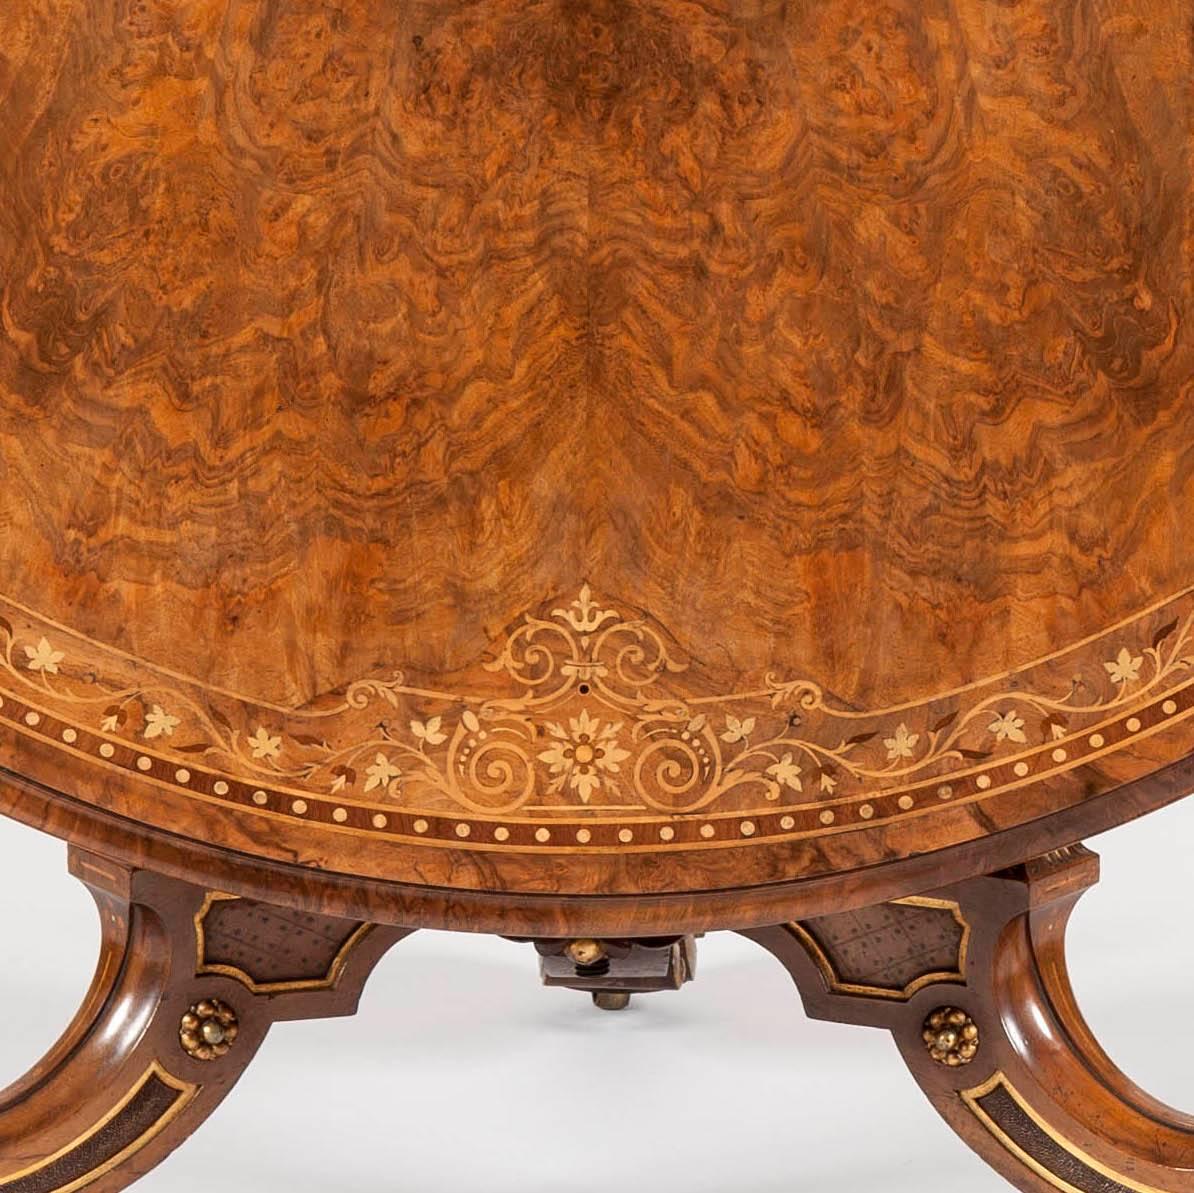 British 19th Century English Walnut with Marquetry Center Table For Sale